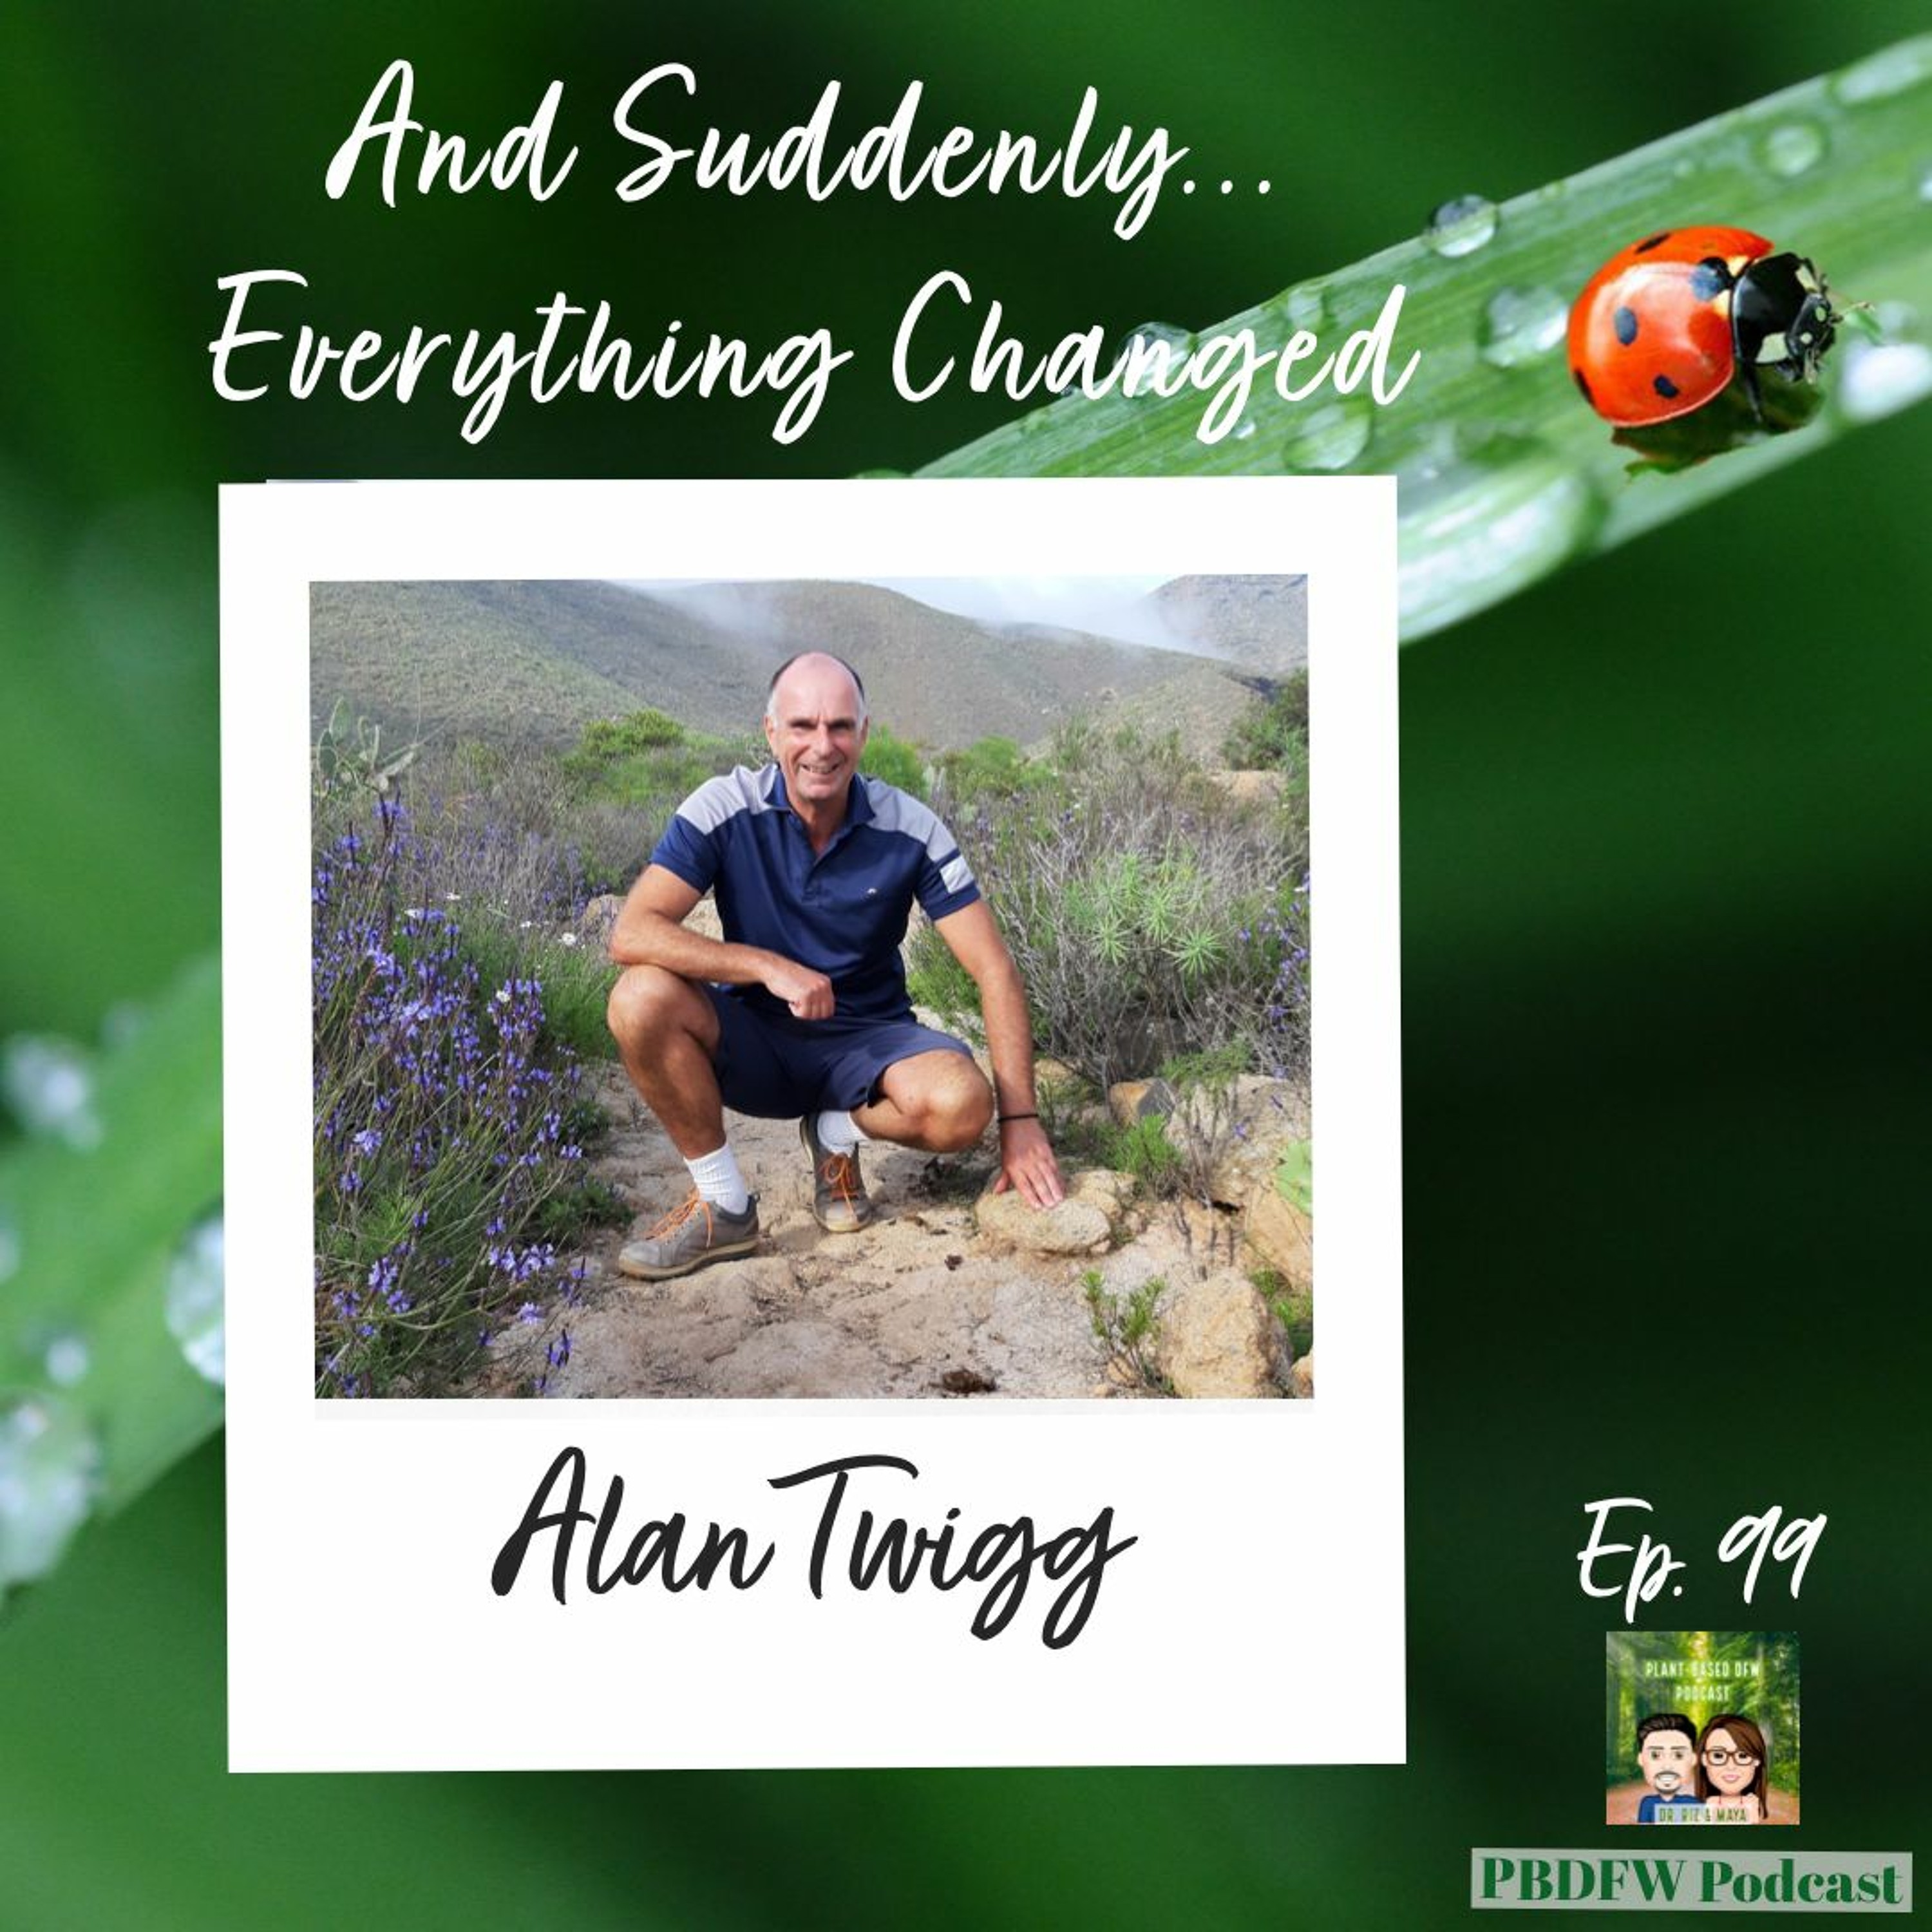 99: And Suddenly, Everything Changed! Author Alan Twigg Image